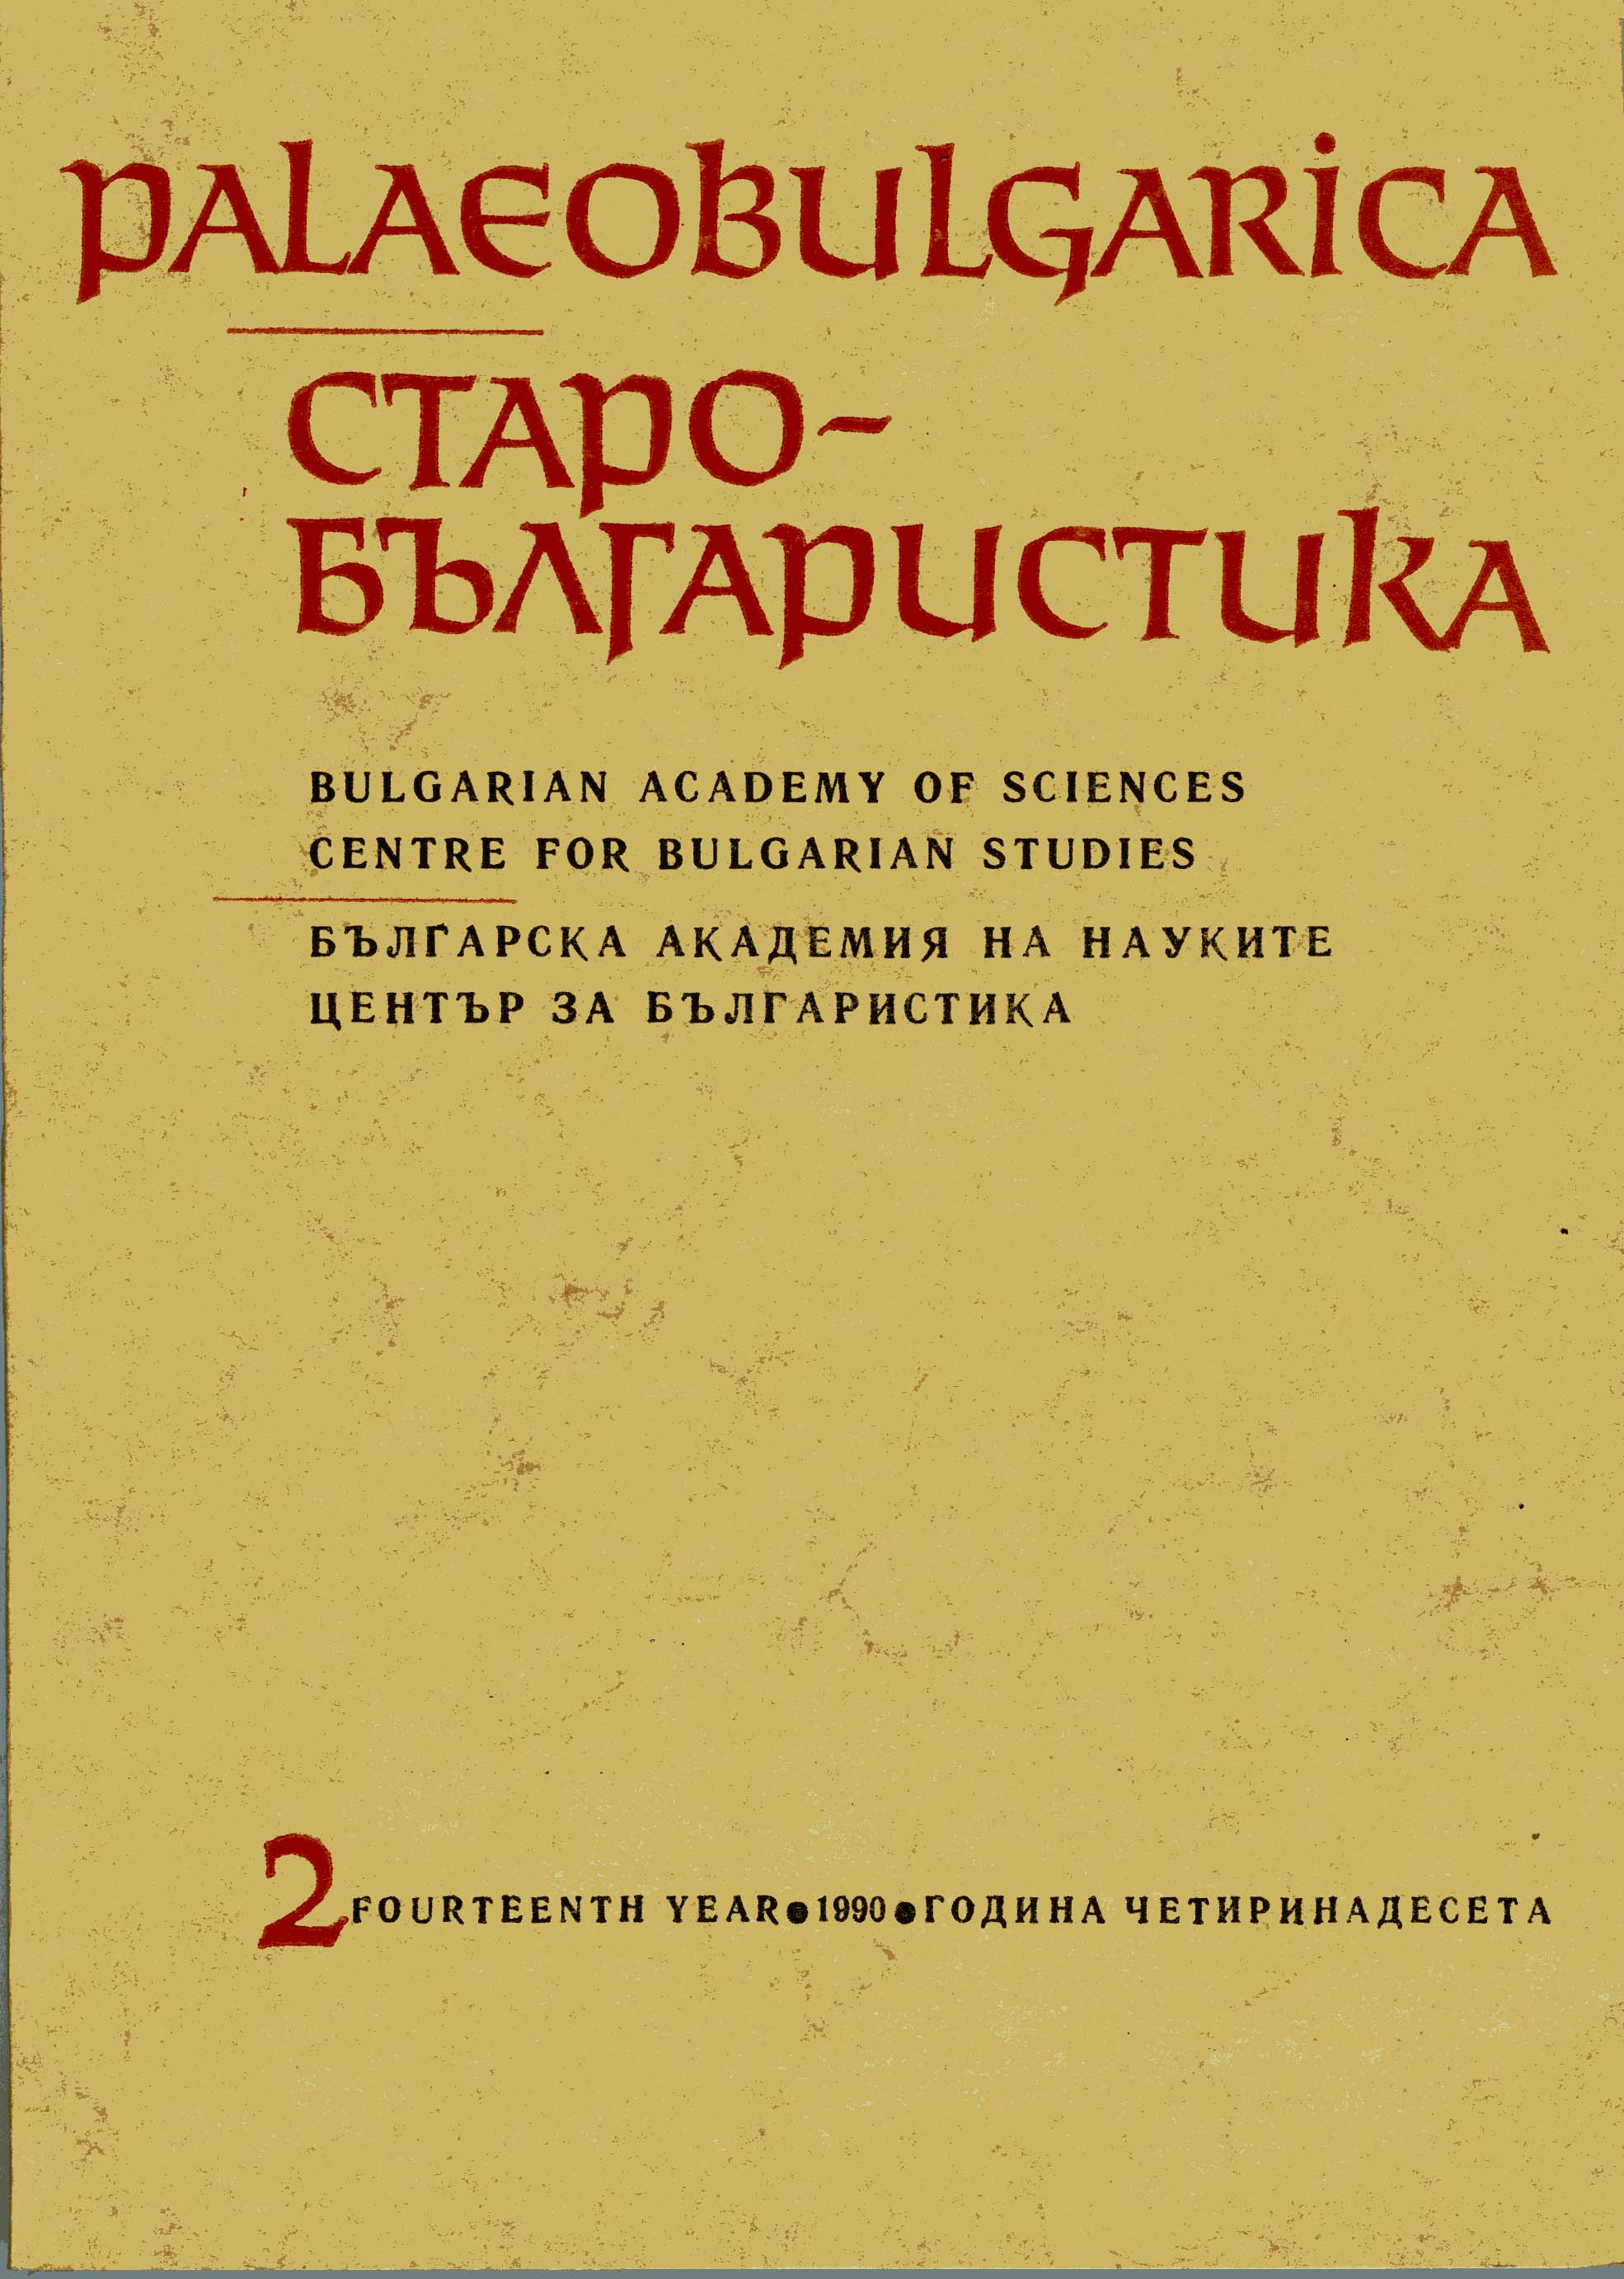 The Greek Textological Basis of the Early Redactions of the Church Slavonic Psalter Cover Image